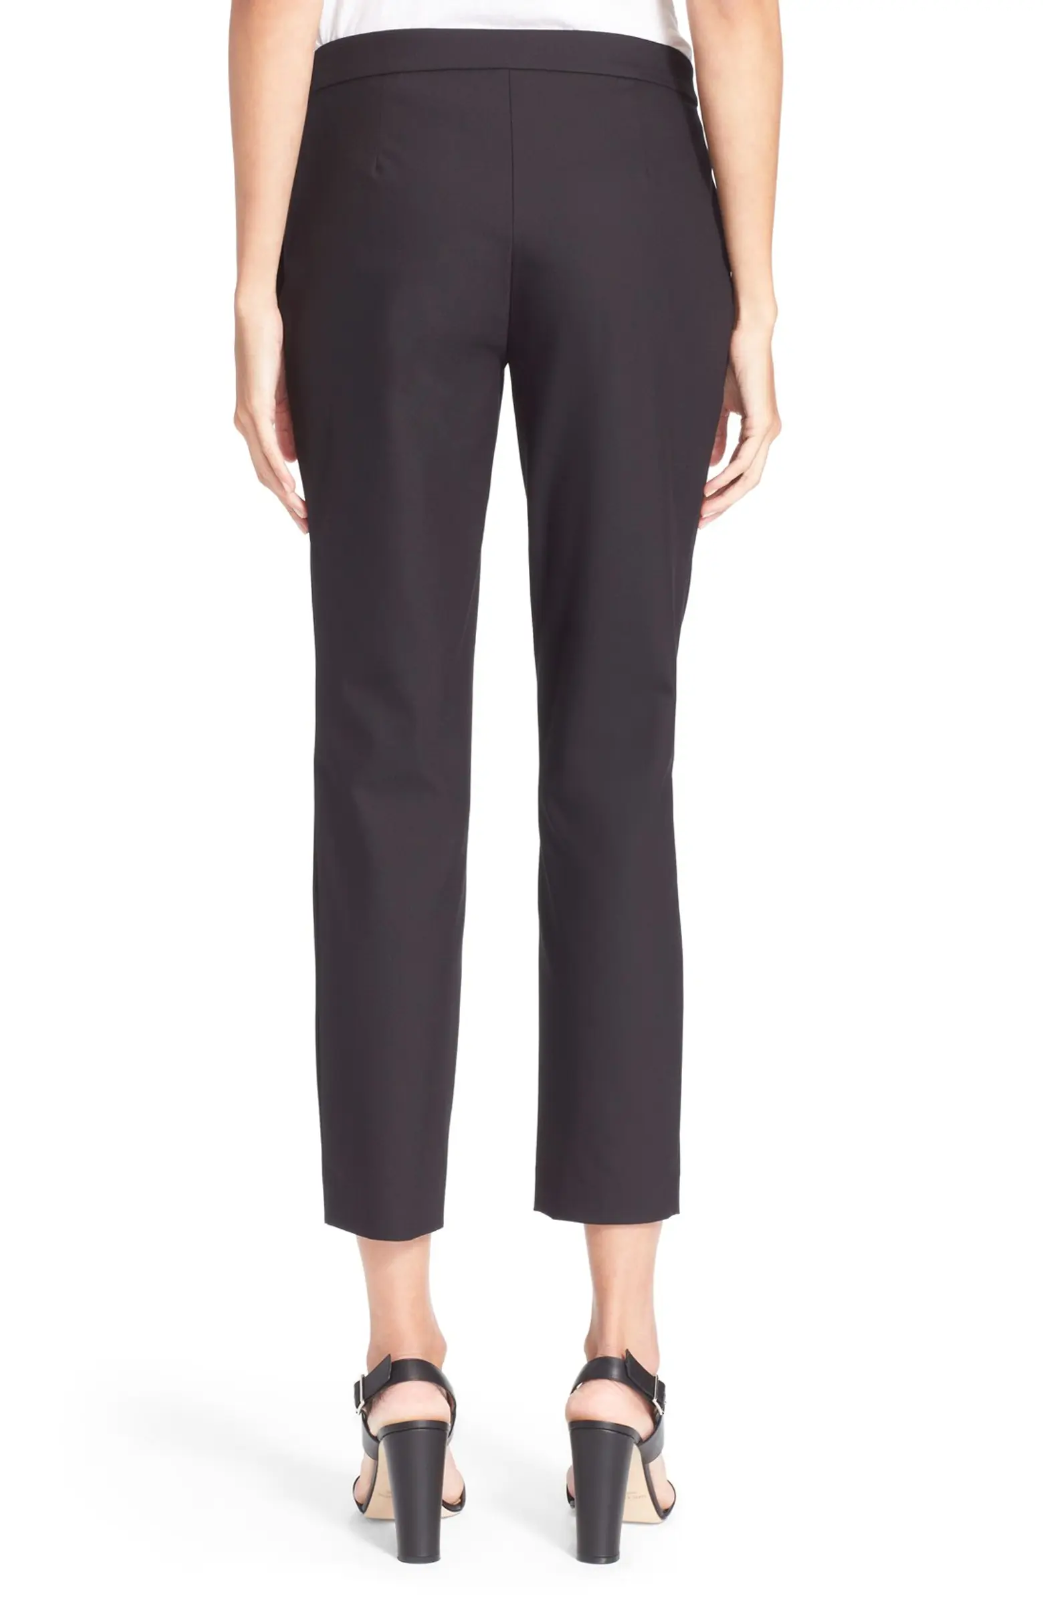 Theory Women's Cropped Thaniel Pants 2